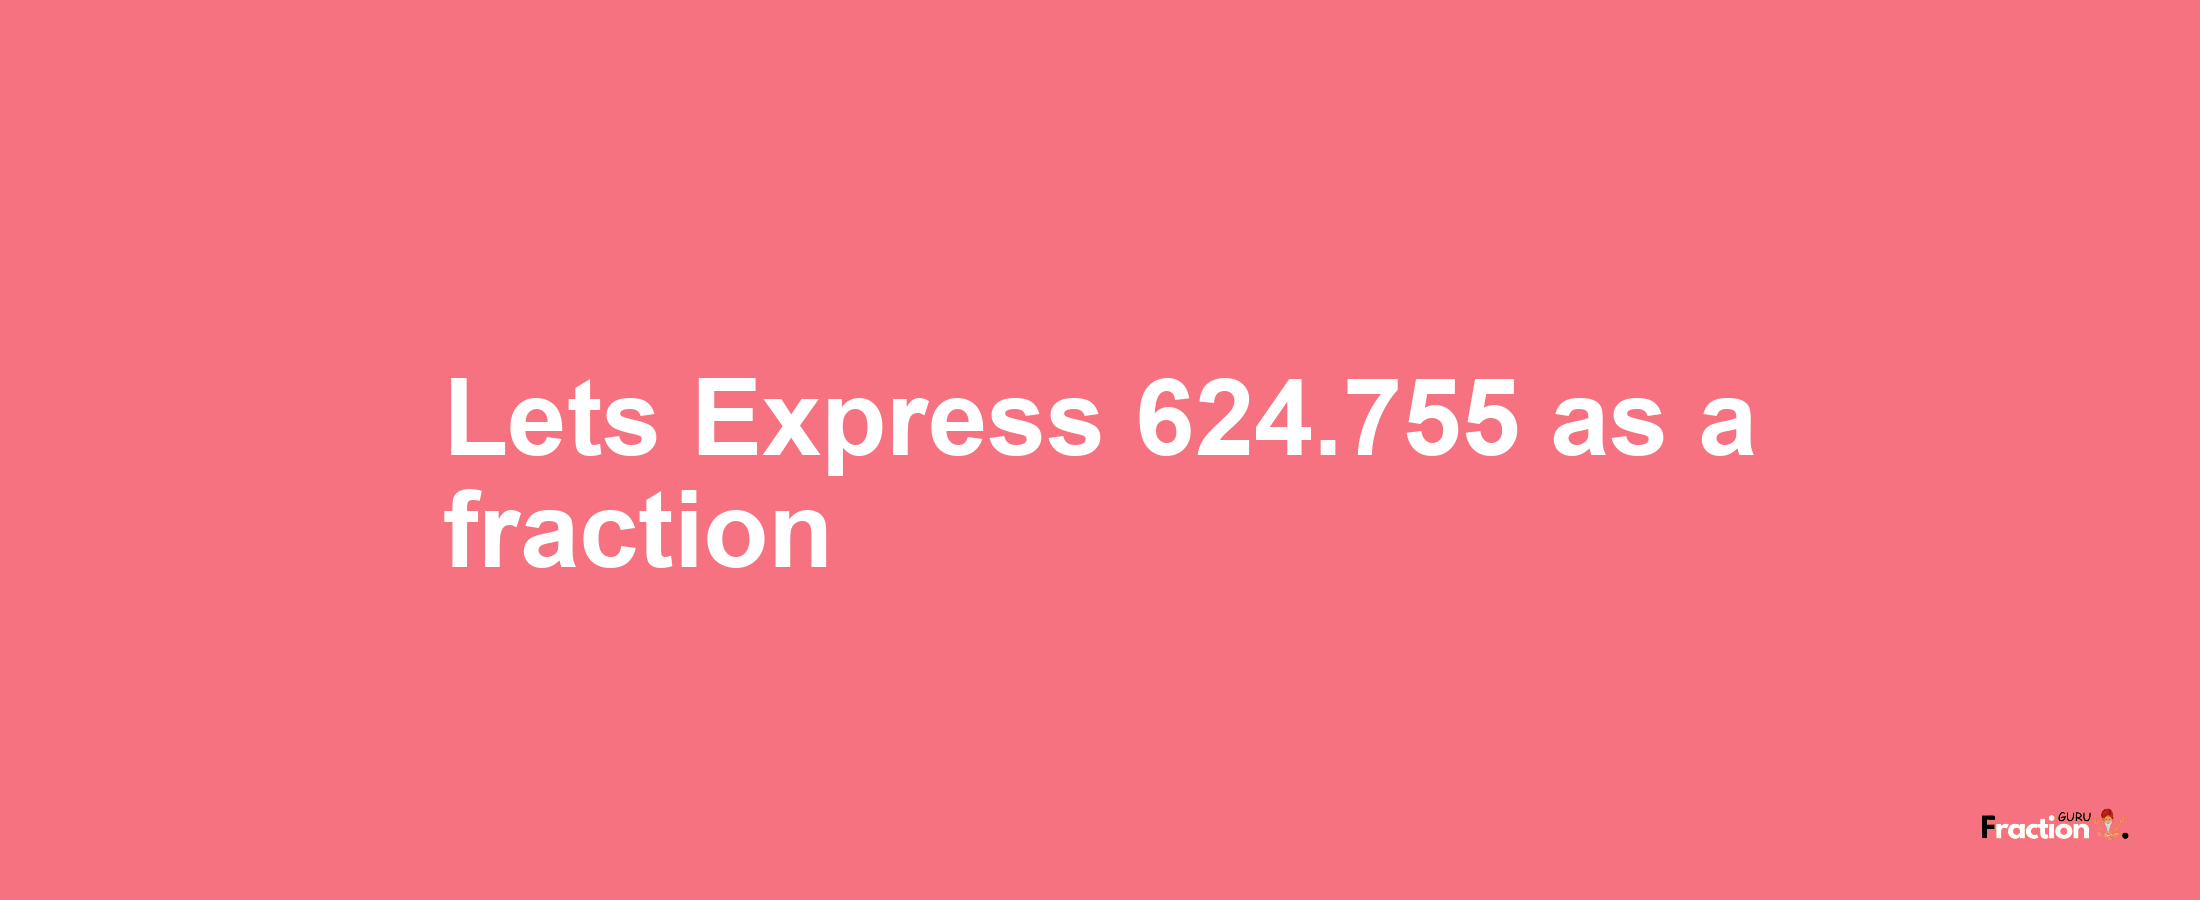 Lets Express 624.755 as afraction